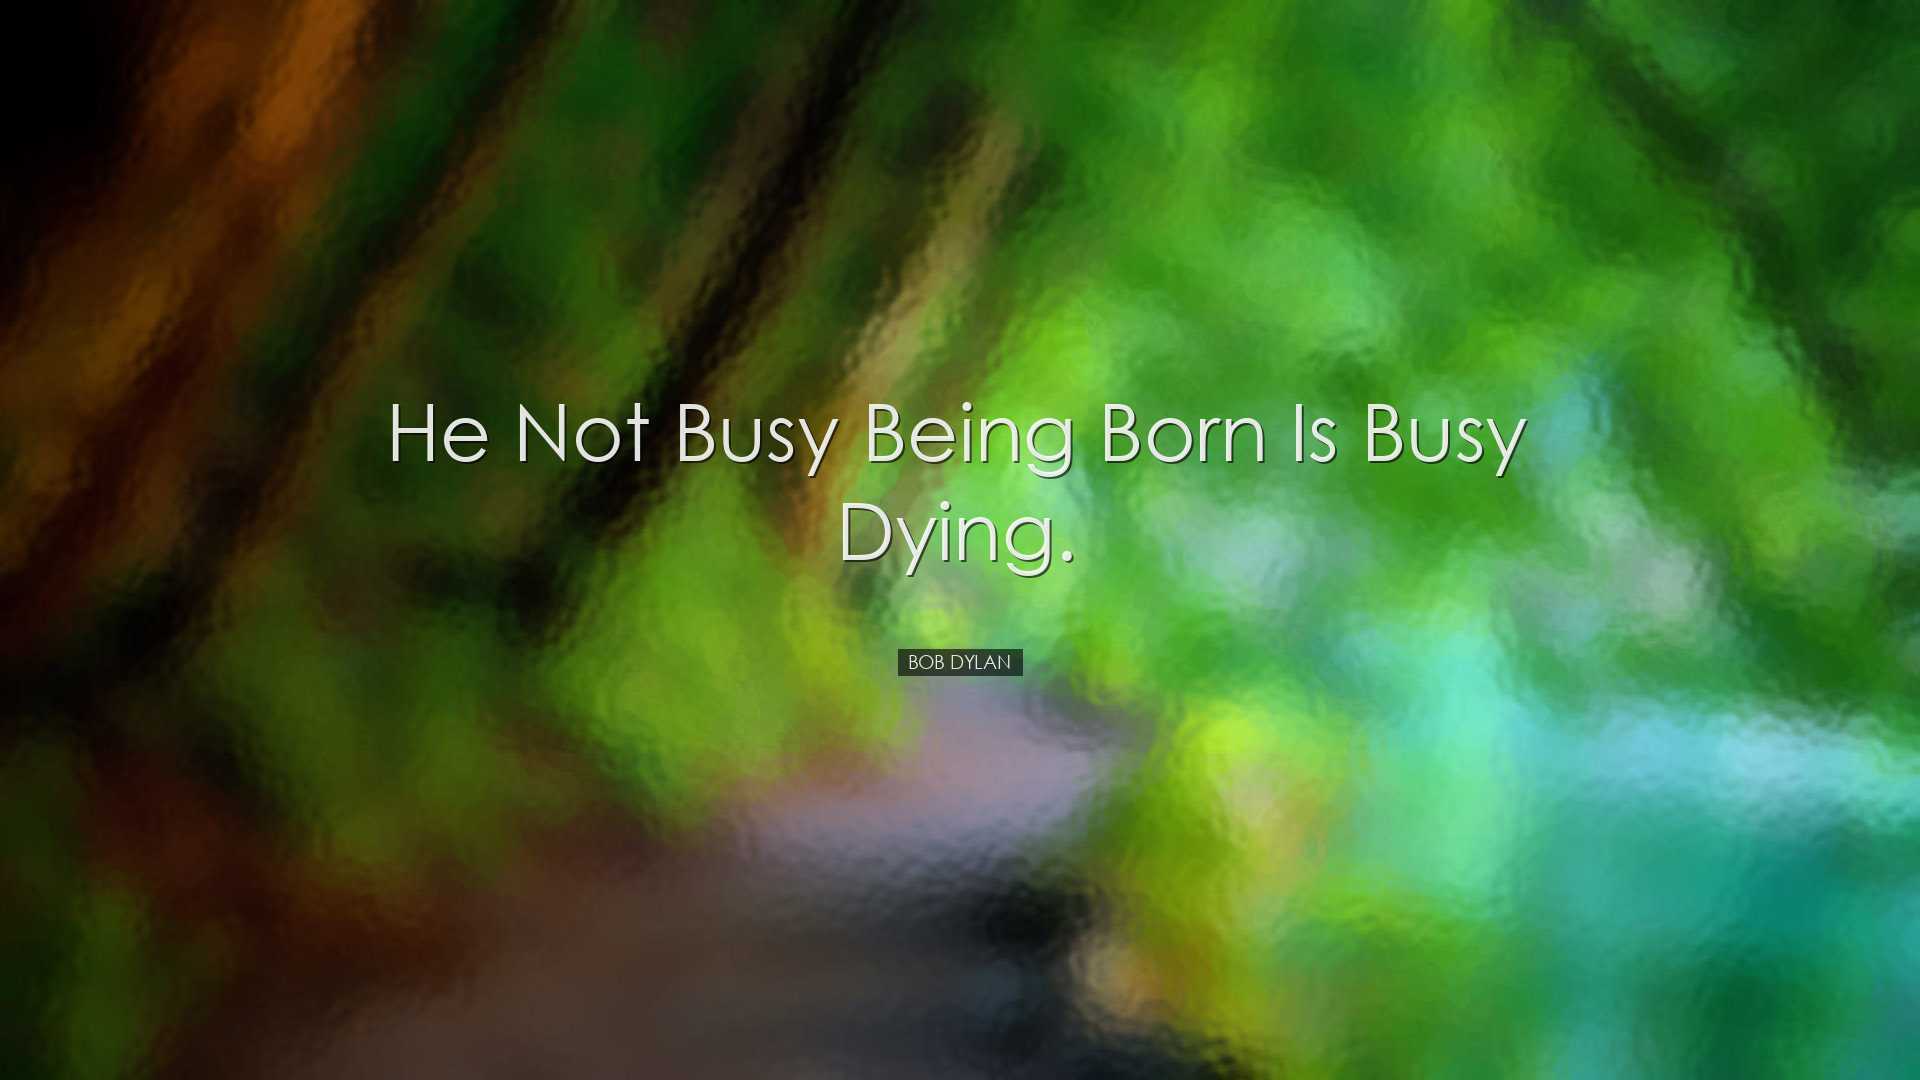 He not busy being born is busy dying. - Bob Dylan